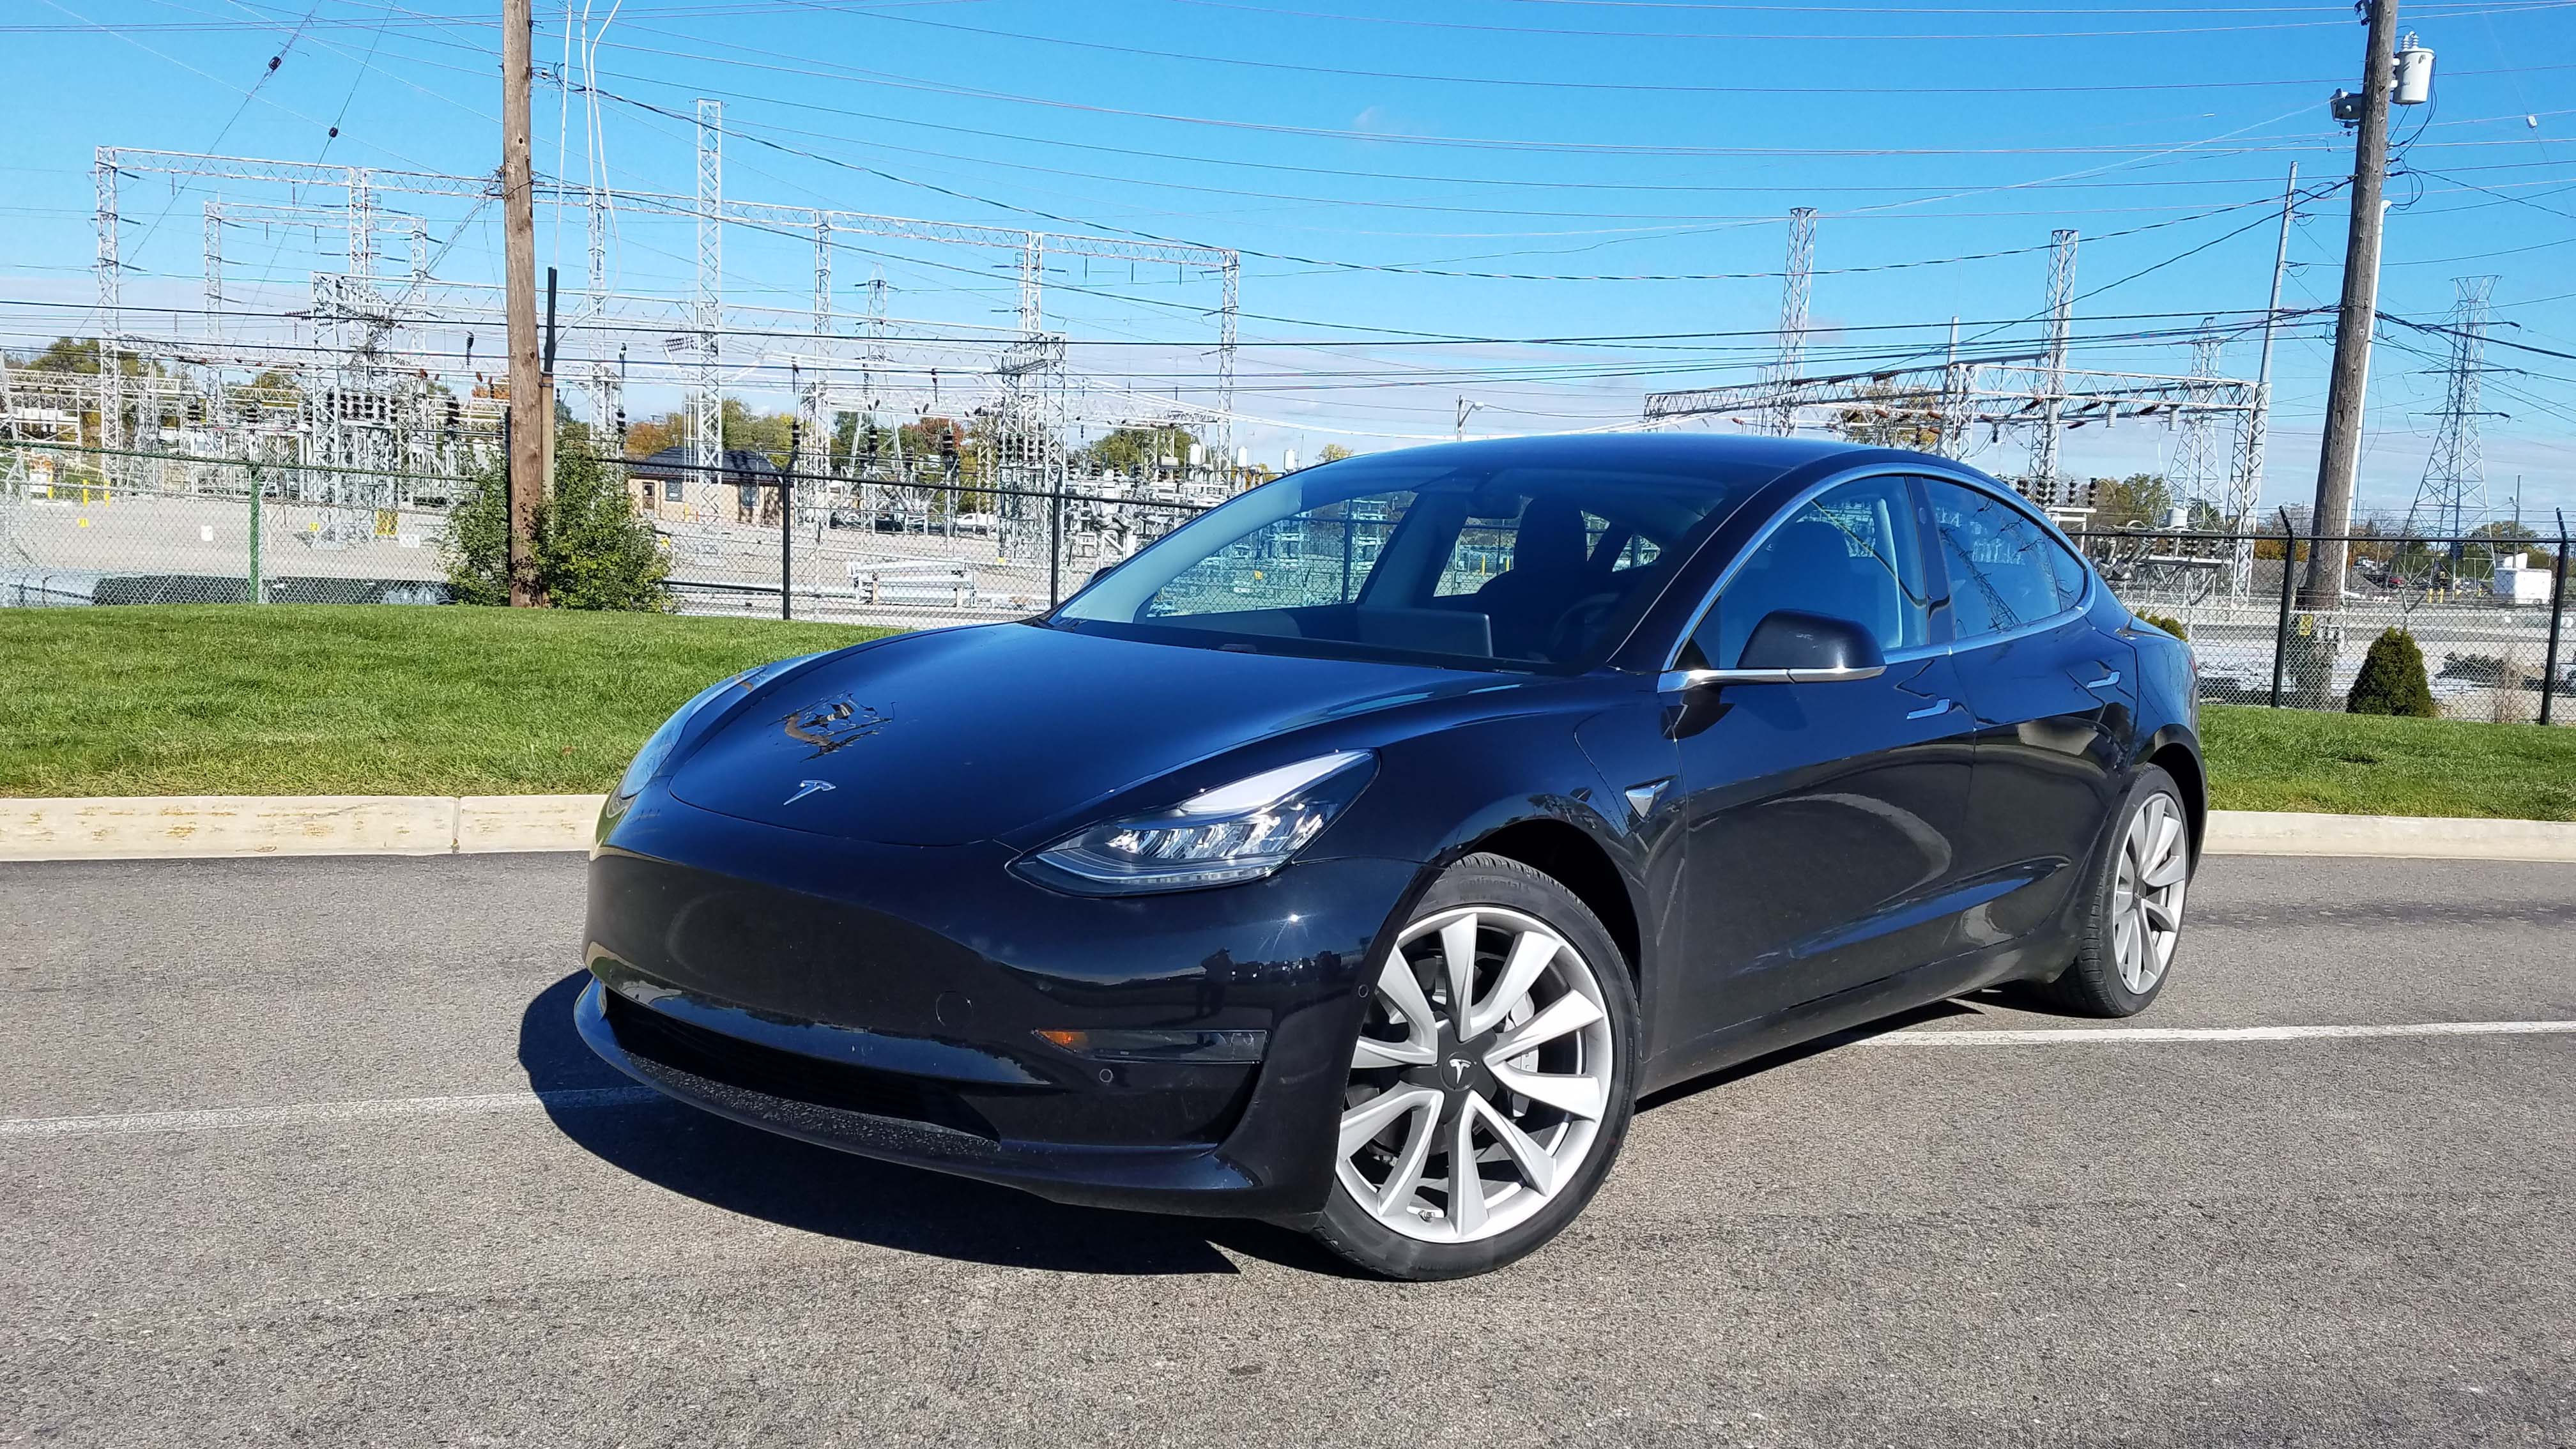 Including $1,000 and $2,500 deposits, this RWD, 310-mile range Tesla Model 3 purchased by Detroit News auto critic Henry Payne cost $57,500. He'll get $7,500 of that back on his taxes through a federal tax credit for electric vehicles.